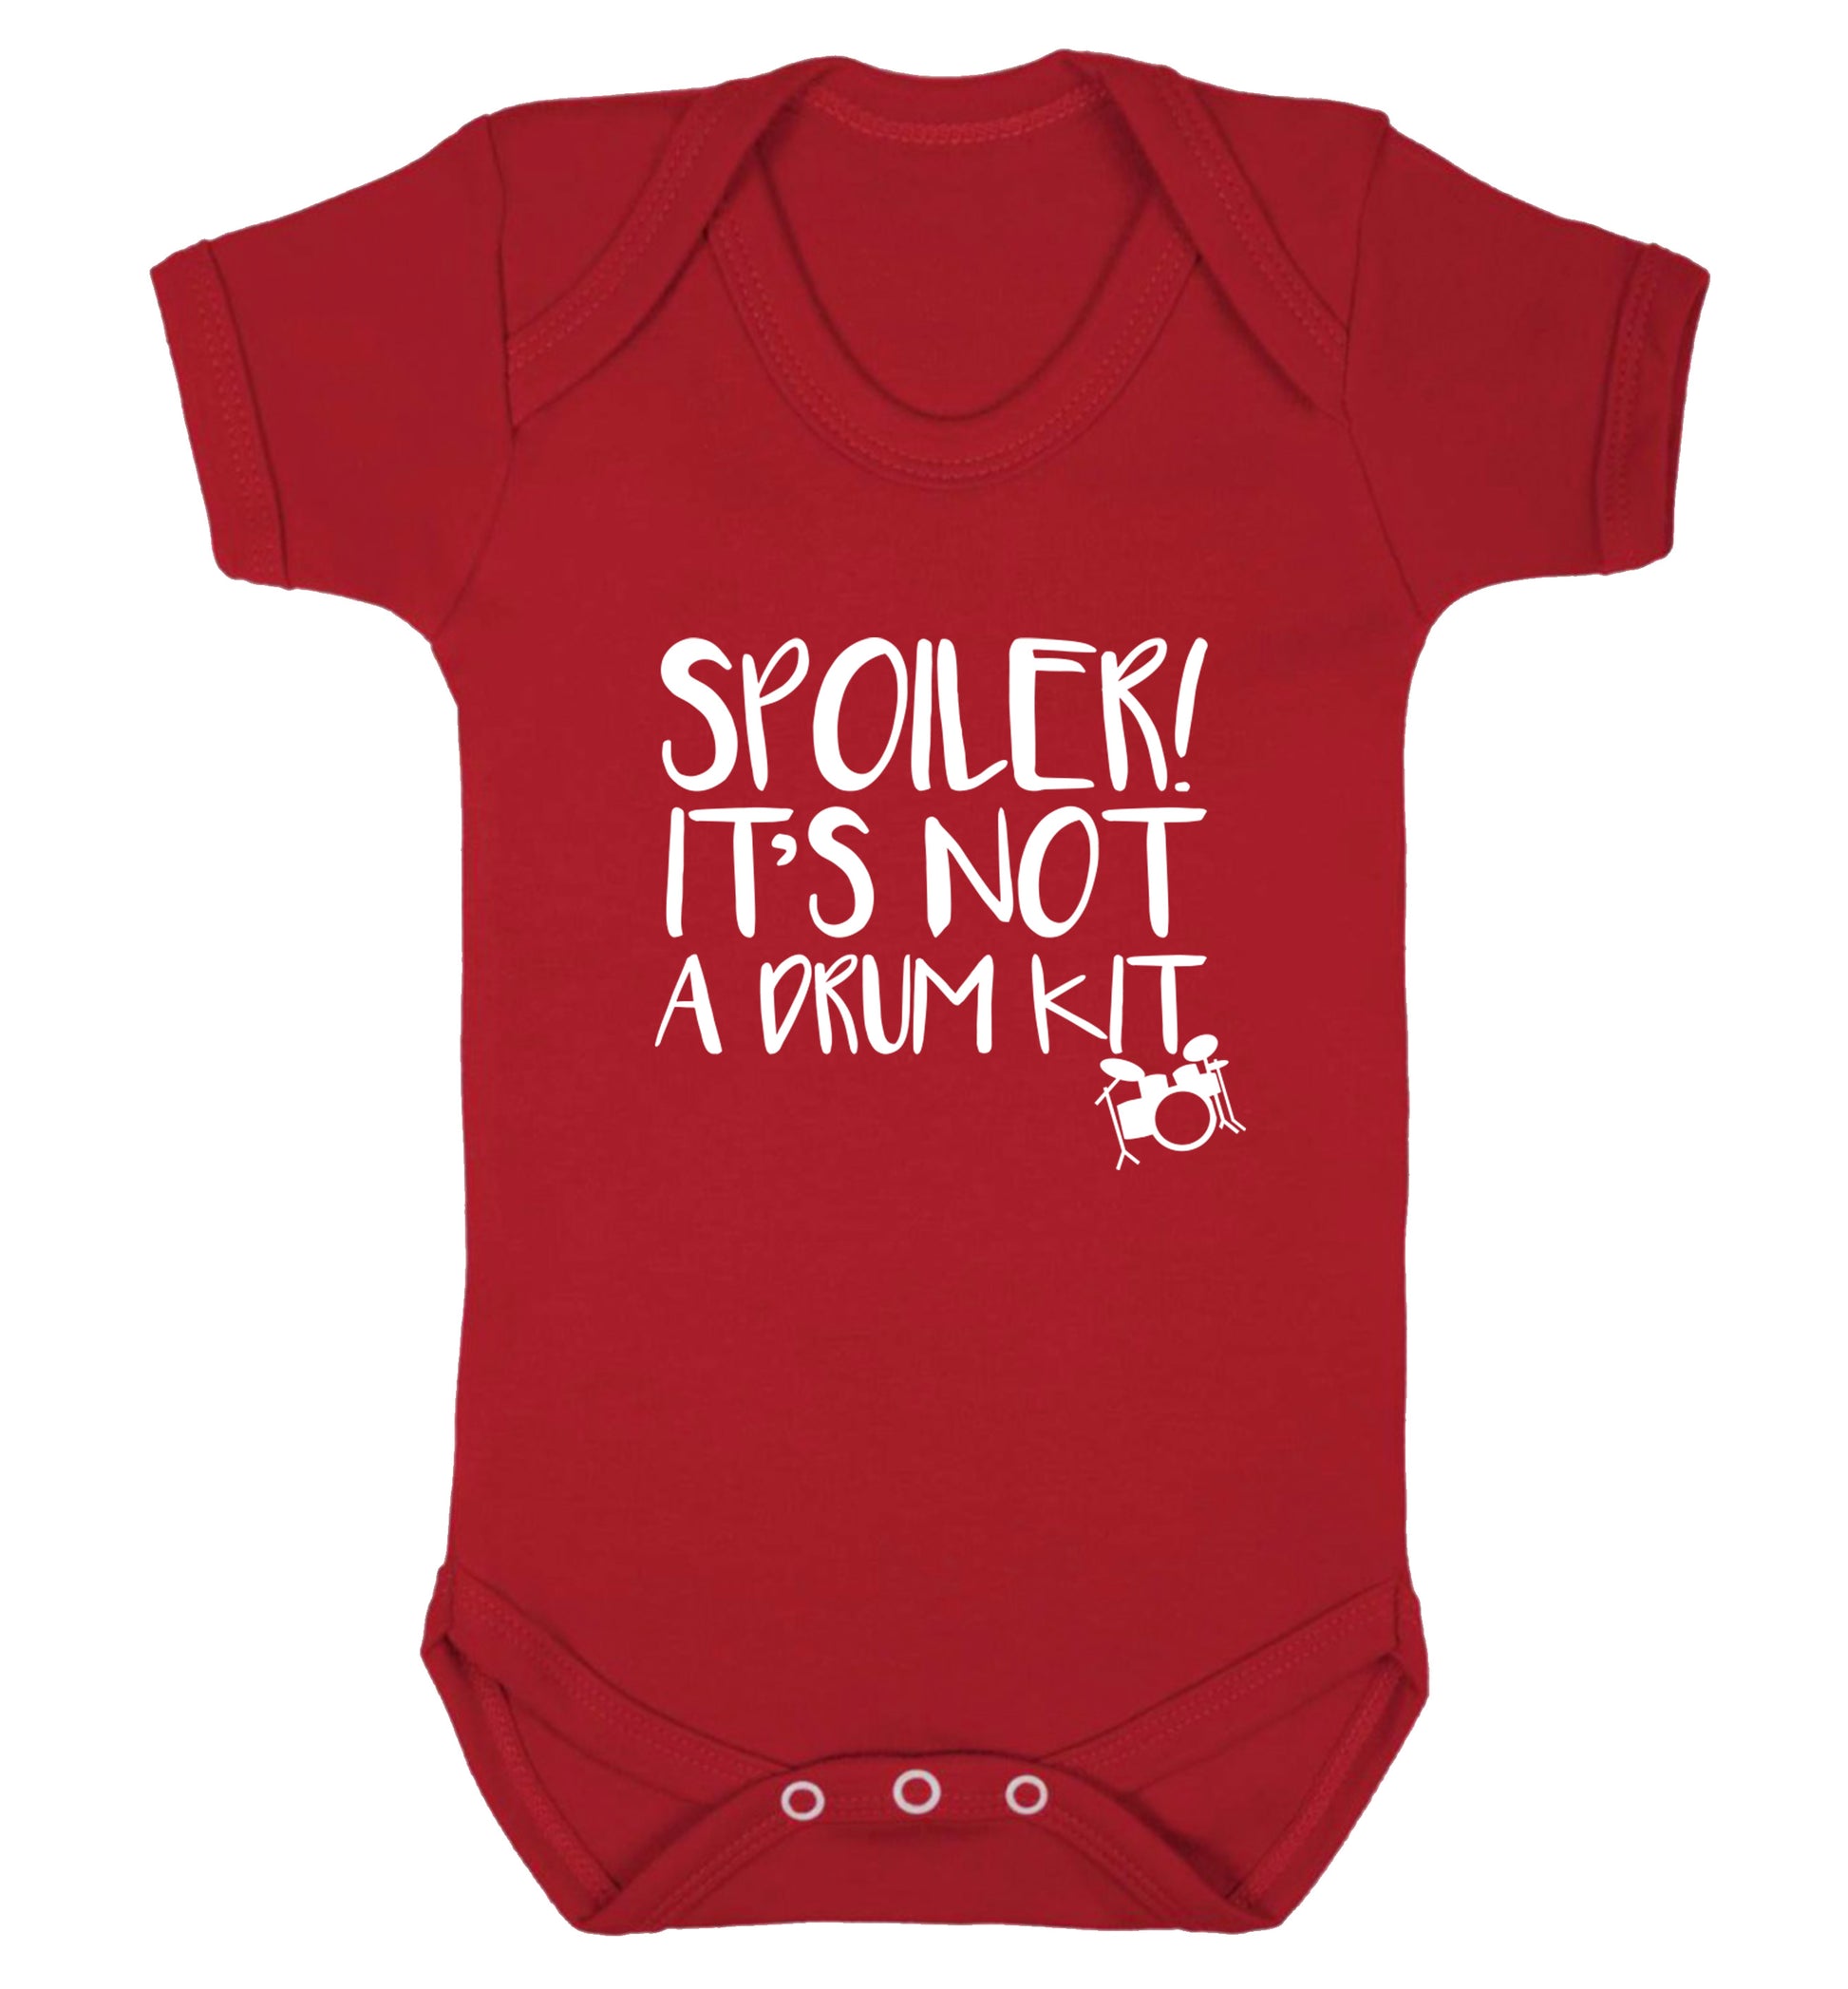 Spoiler it's not a drum kit Baby Vest red 18-24 months